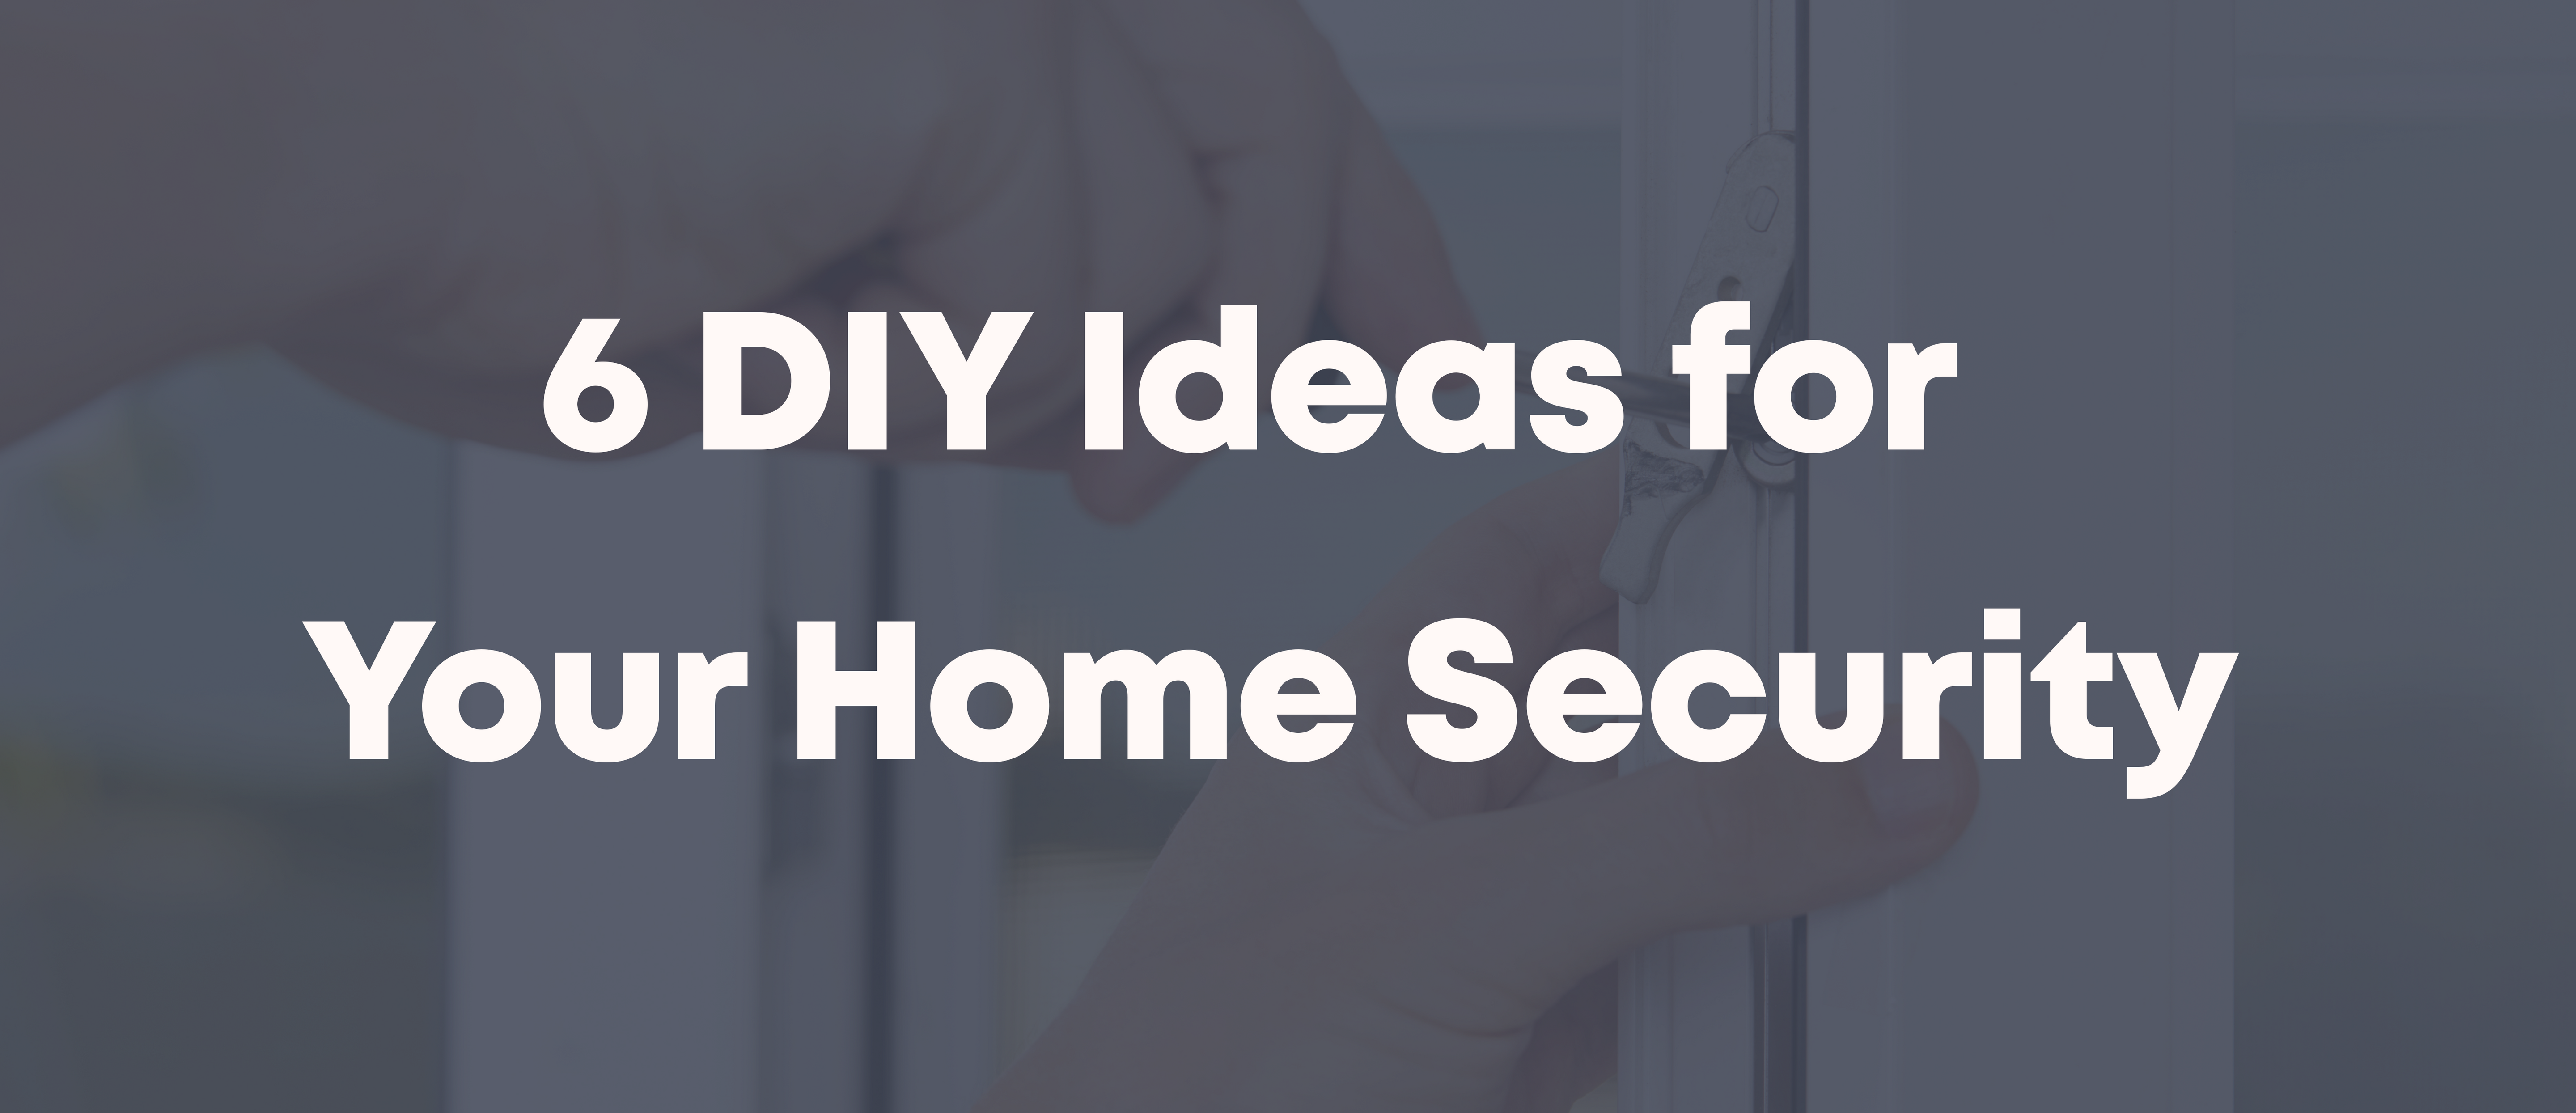 6 DIY ideas for your home security